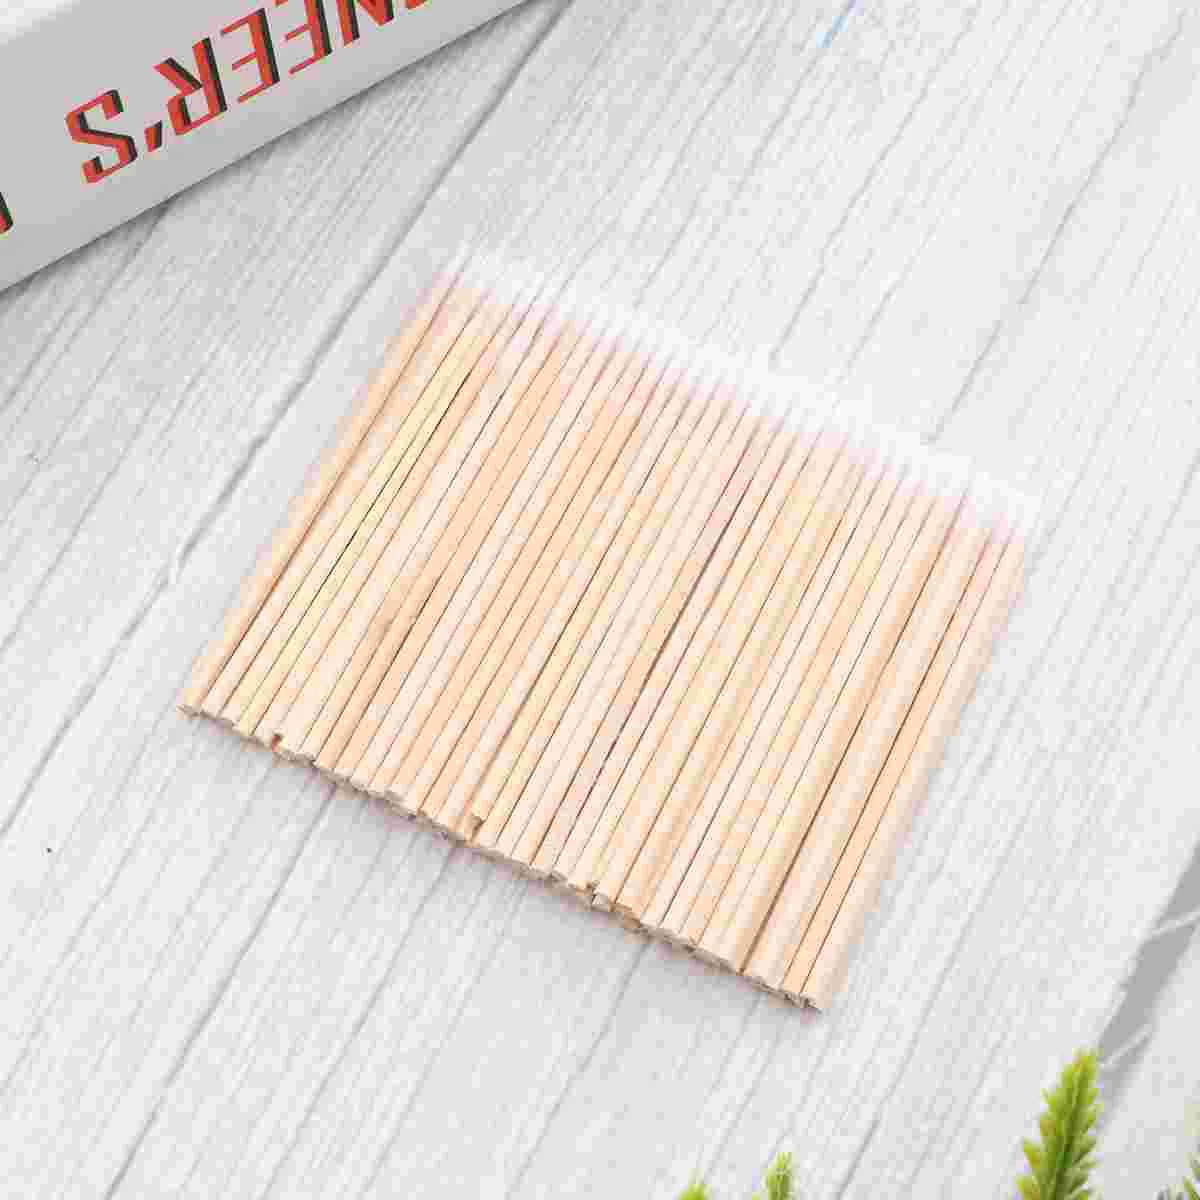 

7 Packs of Disposable Swab Sticks Pointed Cleaning Rods Multi-function Cotton Swab for Makeup Beauty Salon